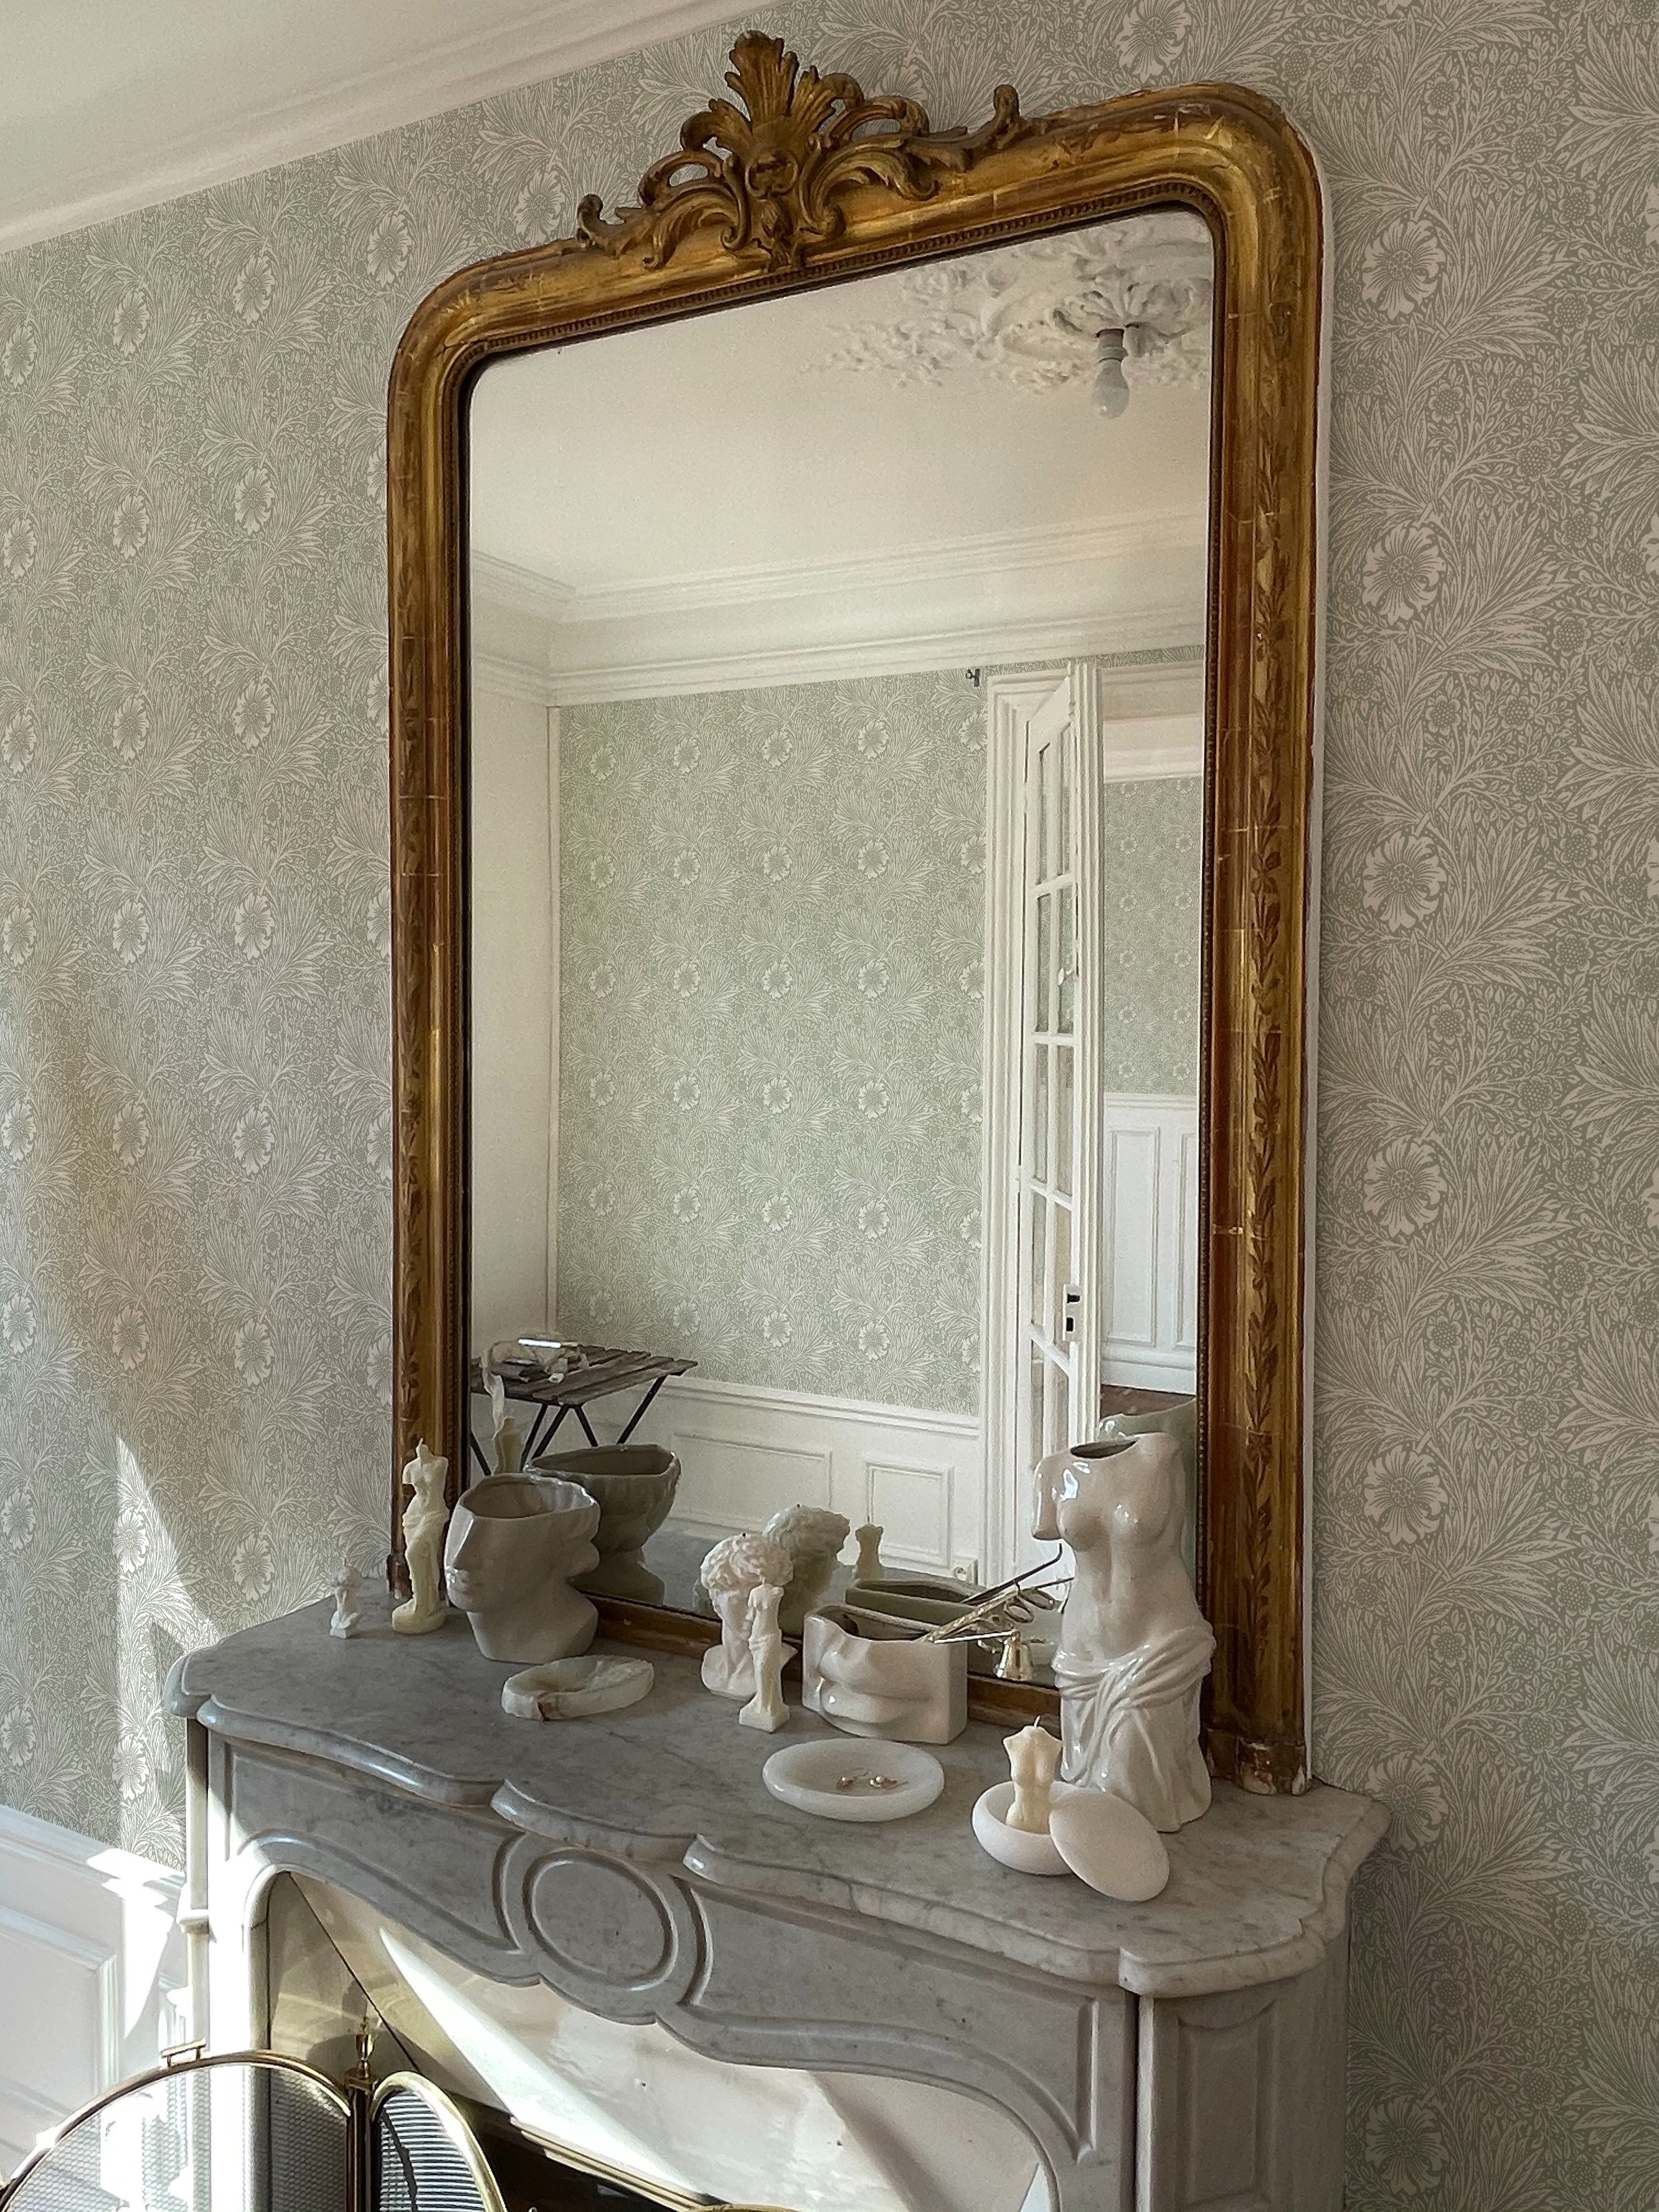 Elegant home office setting showcasing Olive Timeless Floral Wallpaper, featuring a vintage floral pattern in muted olive and beige tones, complementing a classic gold-framed mirror and marble fireplace adorned with porcelain figurines